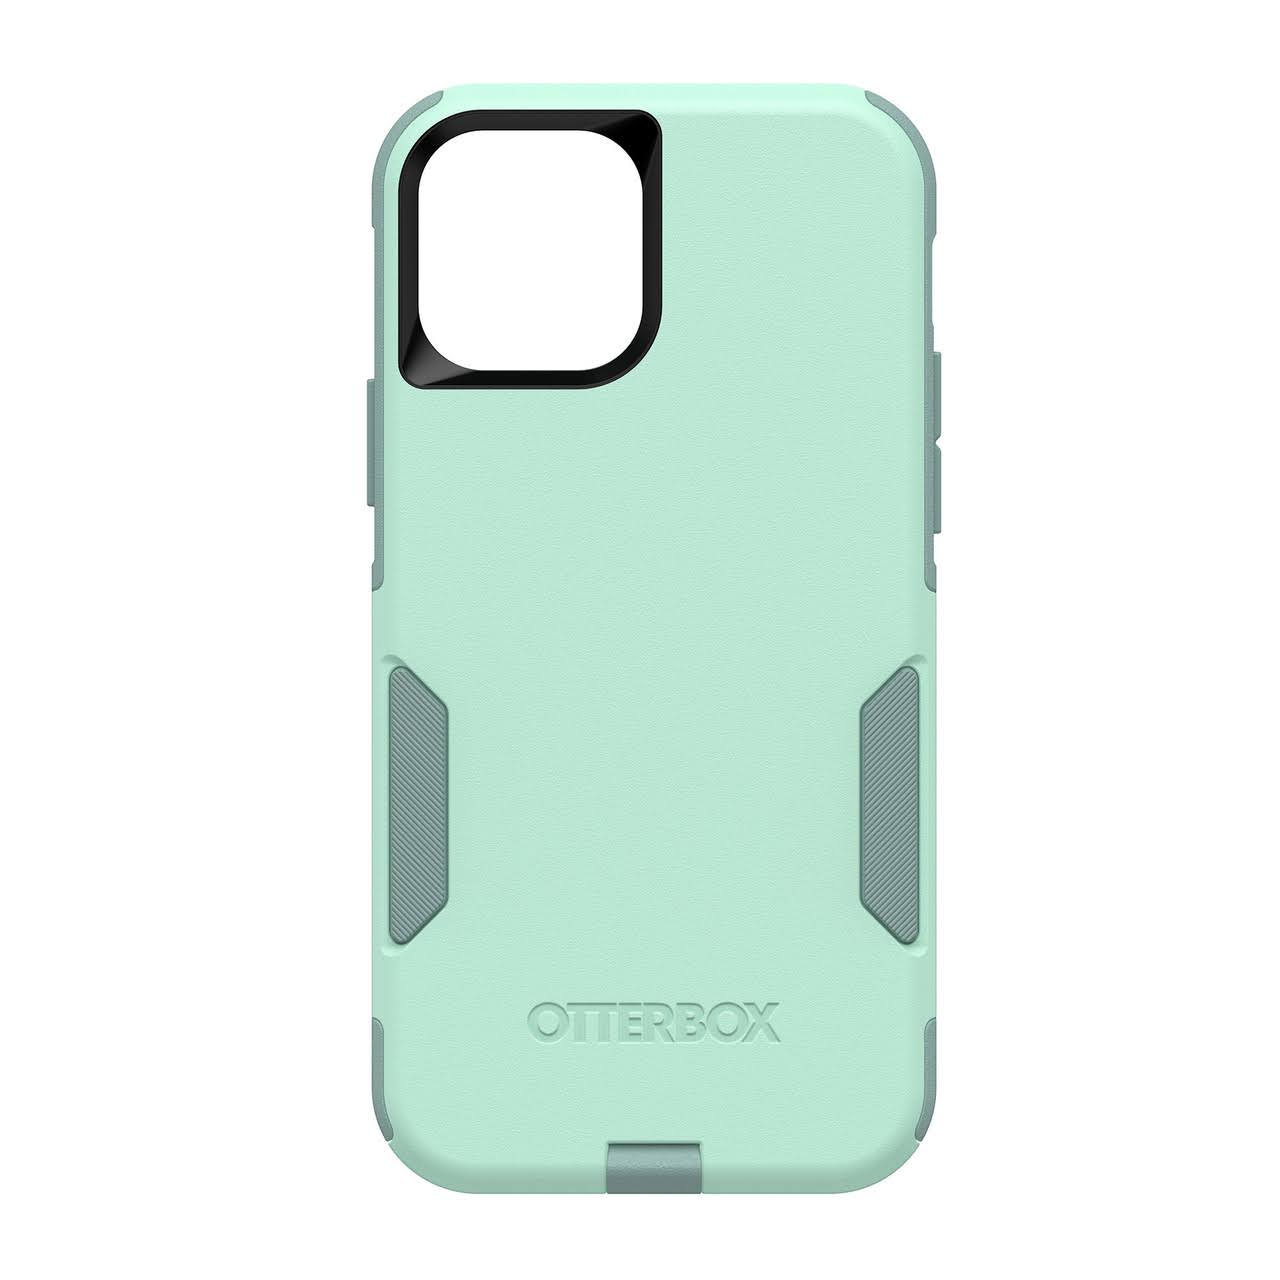 Otterbox - Commuter Protective Case for iPhone 12/12 Pro Aqua